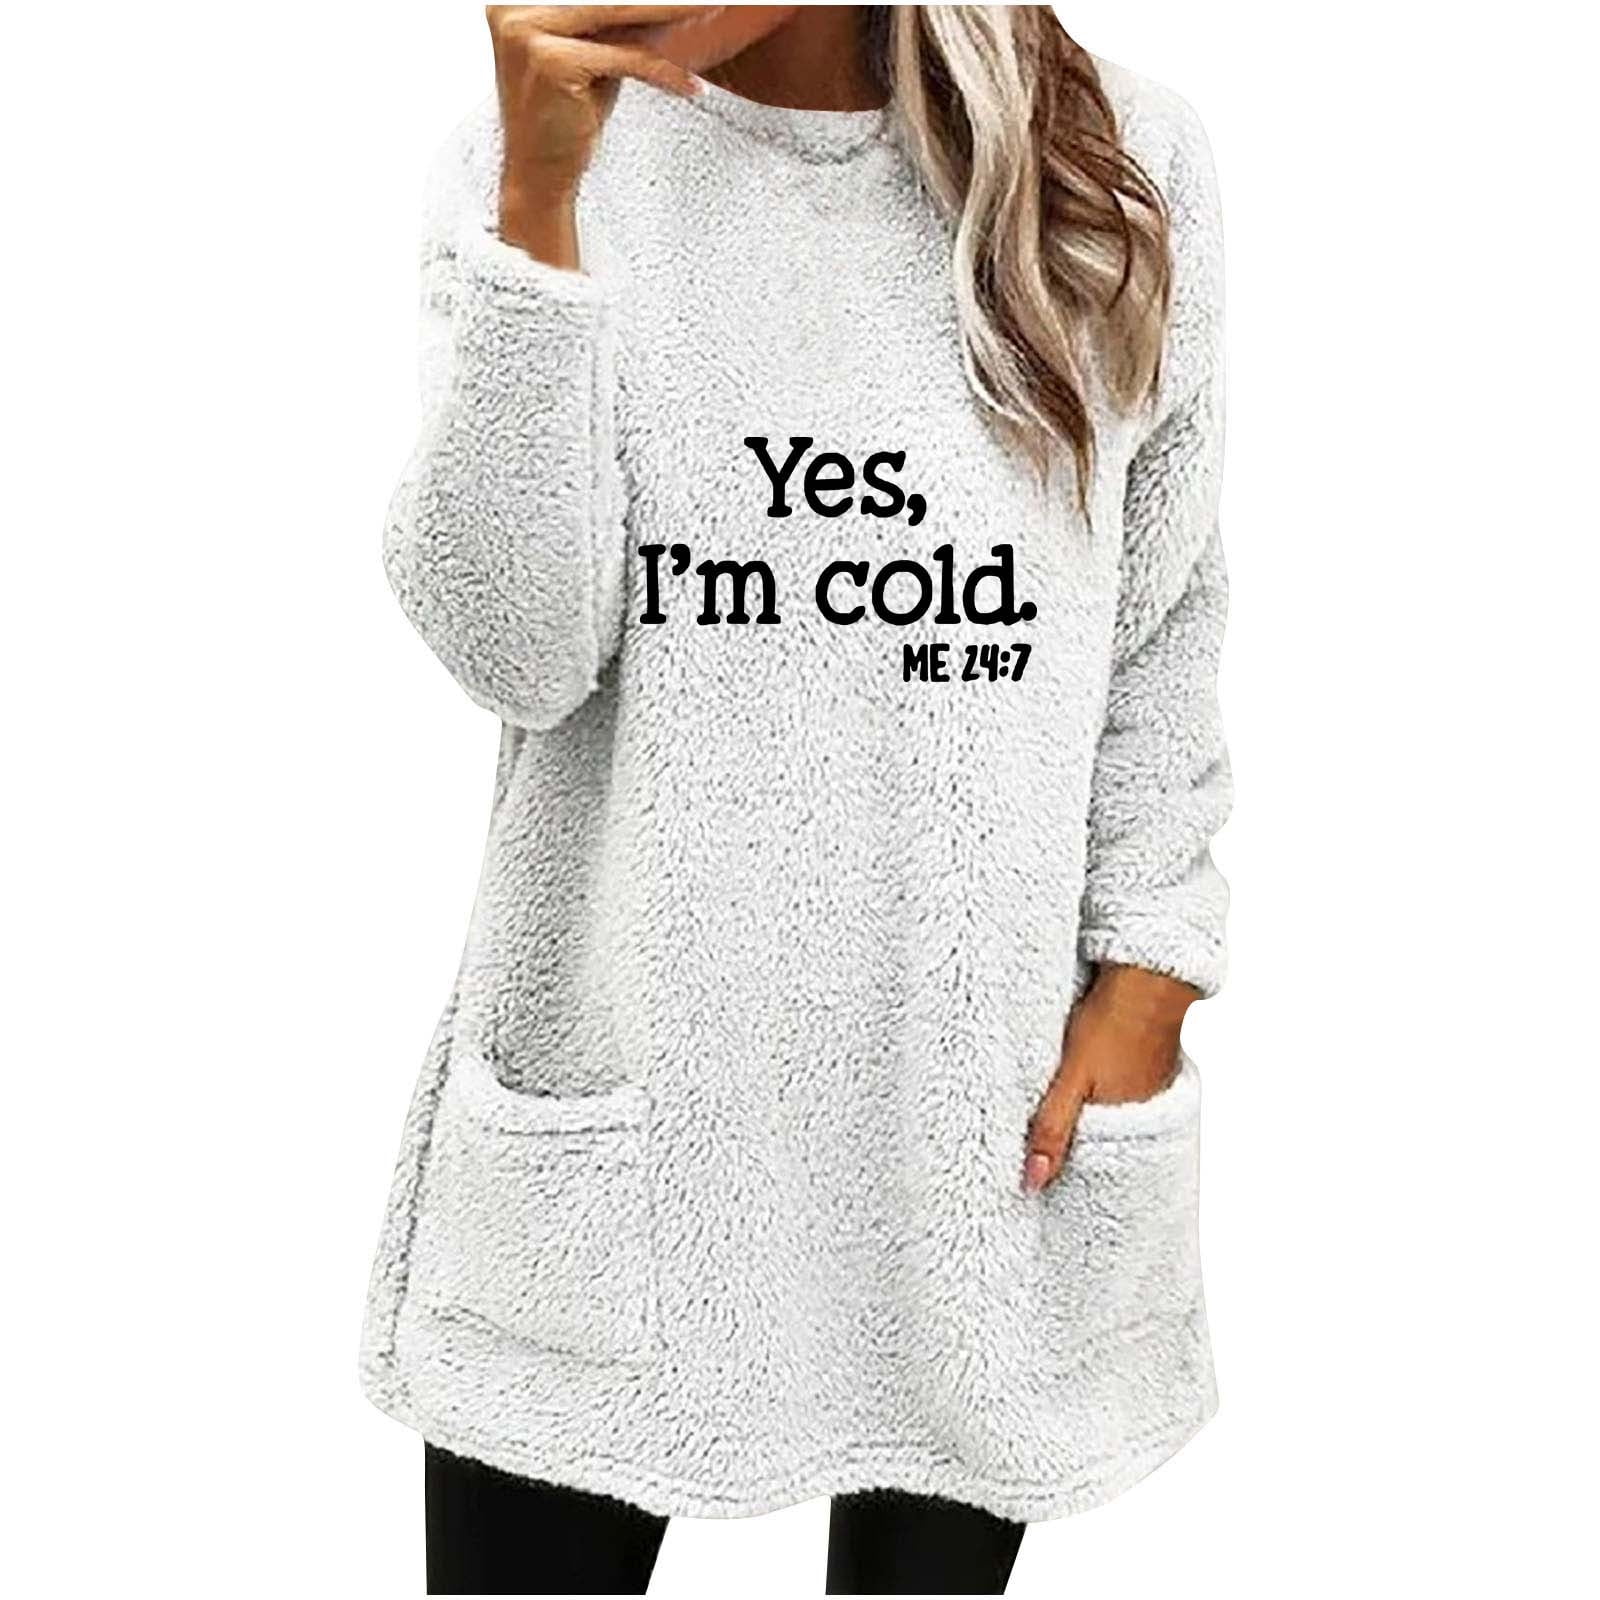 Yes I'm Cold Womens Fuzzy Fleece Tops Printed Crewneck Pullover ...